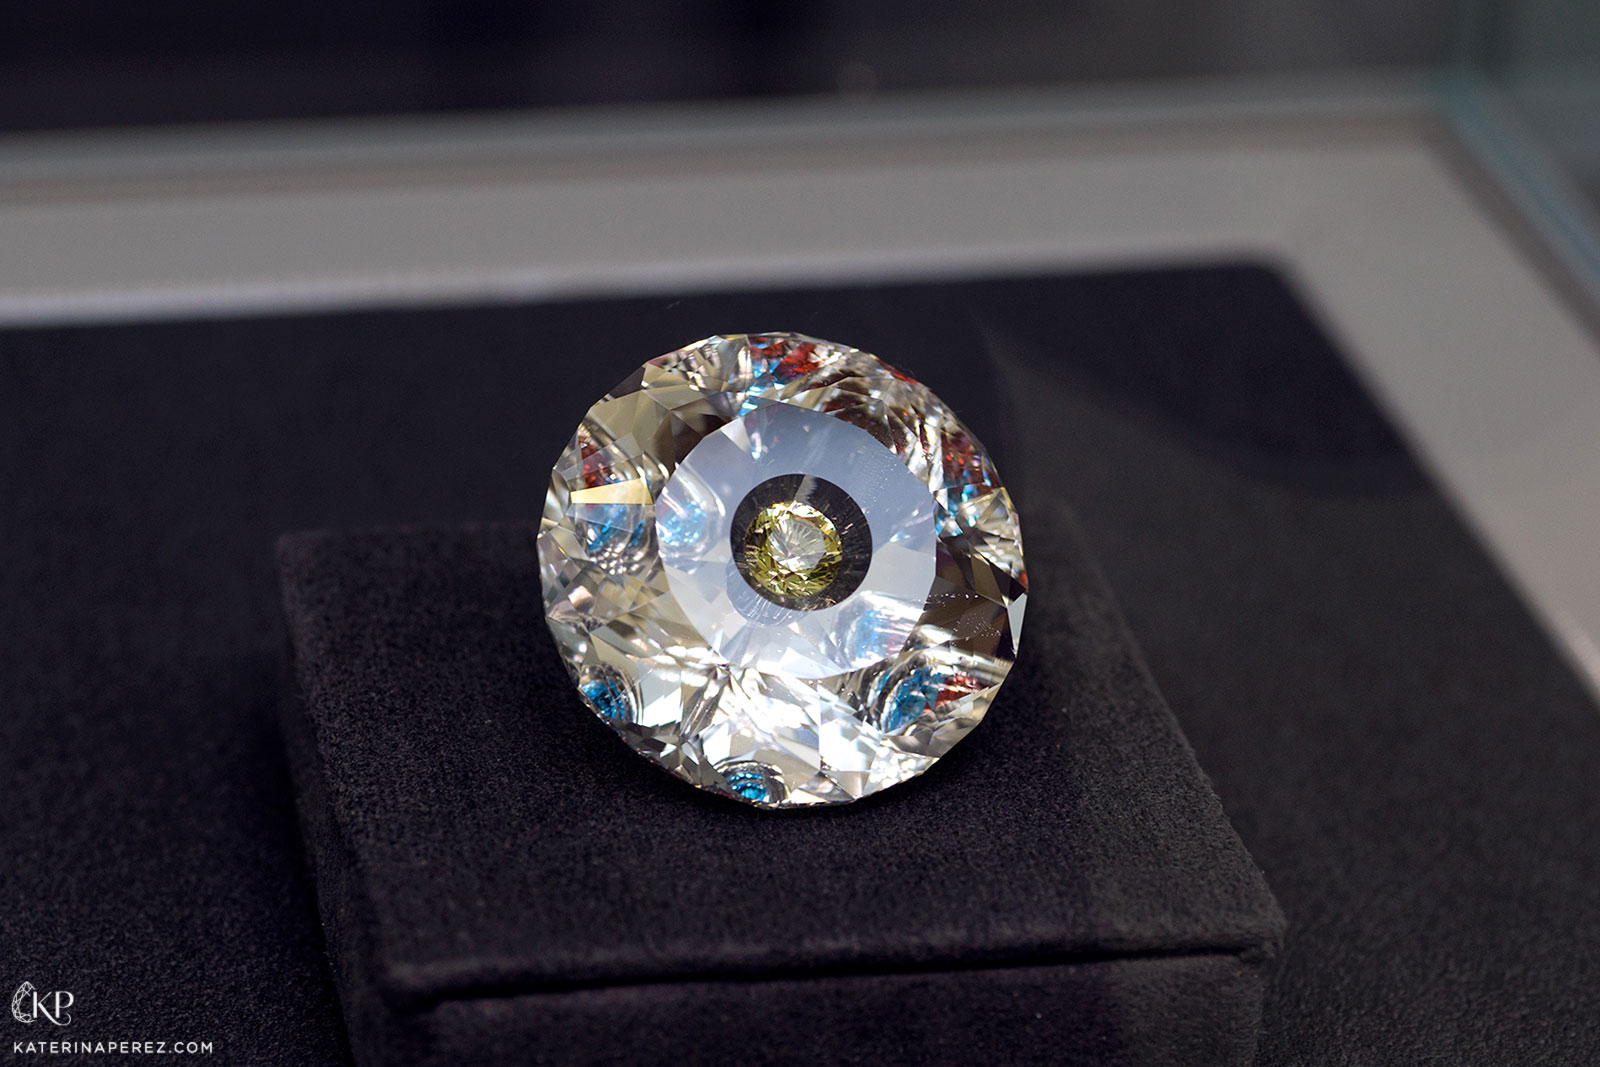 Dmitriy Samorukov '50th Anniversary of the Diamond Fund' composite gemstone. Colourless topaz is used as a based which is further embellished with garnets, blue topaz and heliodor